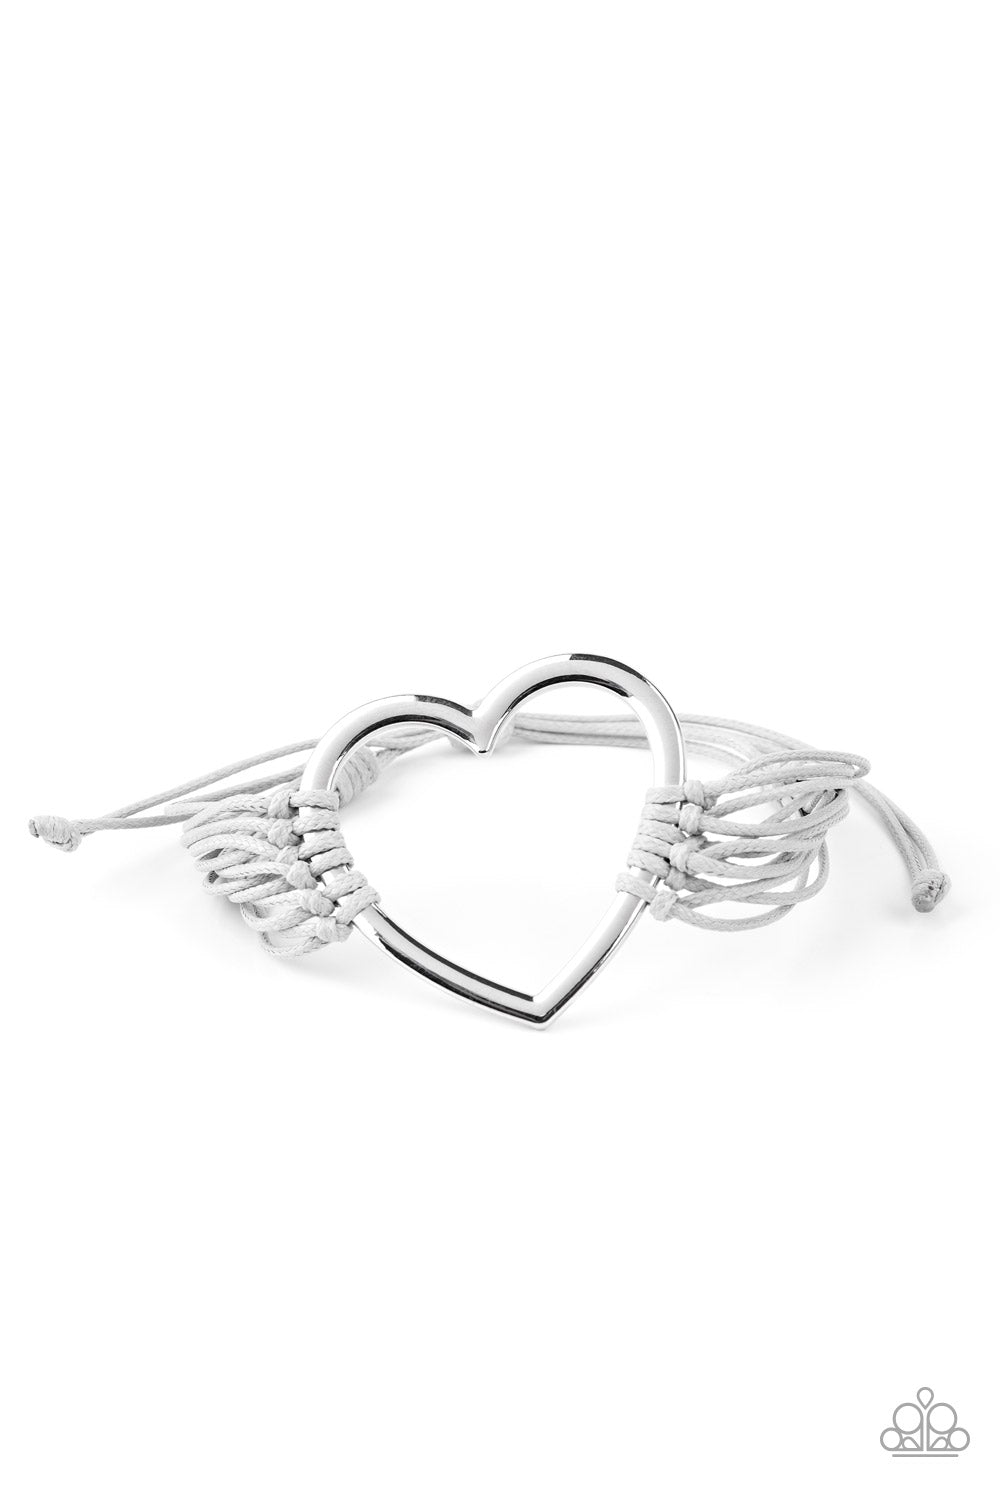 PLAYING WITH MY HEARTSTRINGS - SILVER - Pretykimsbling